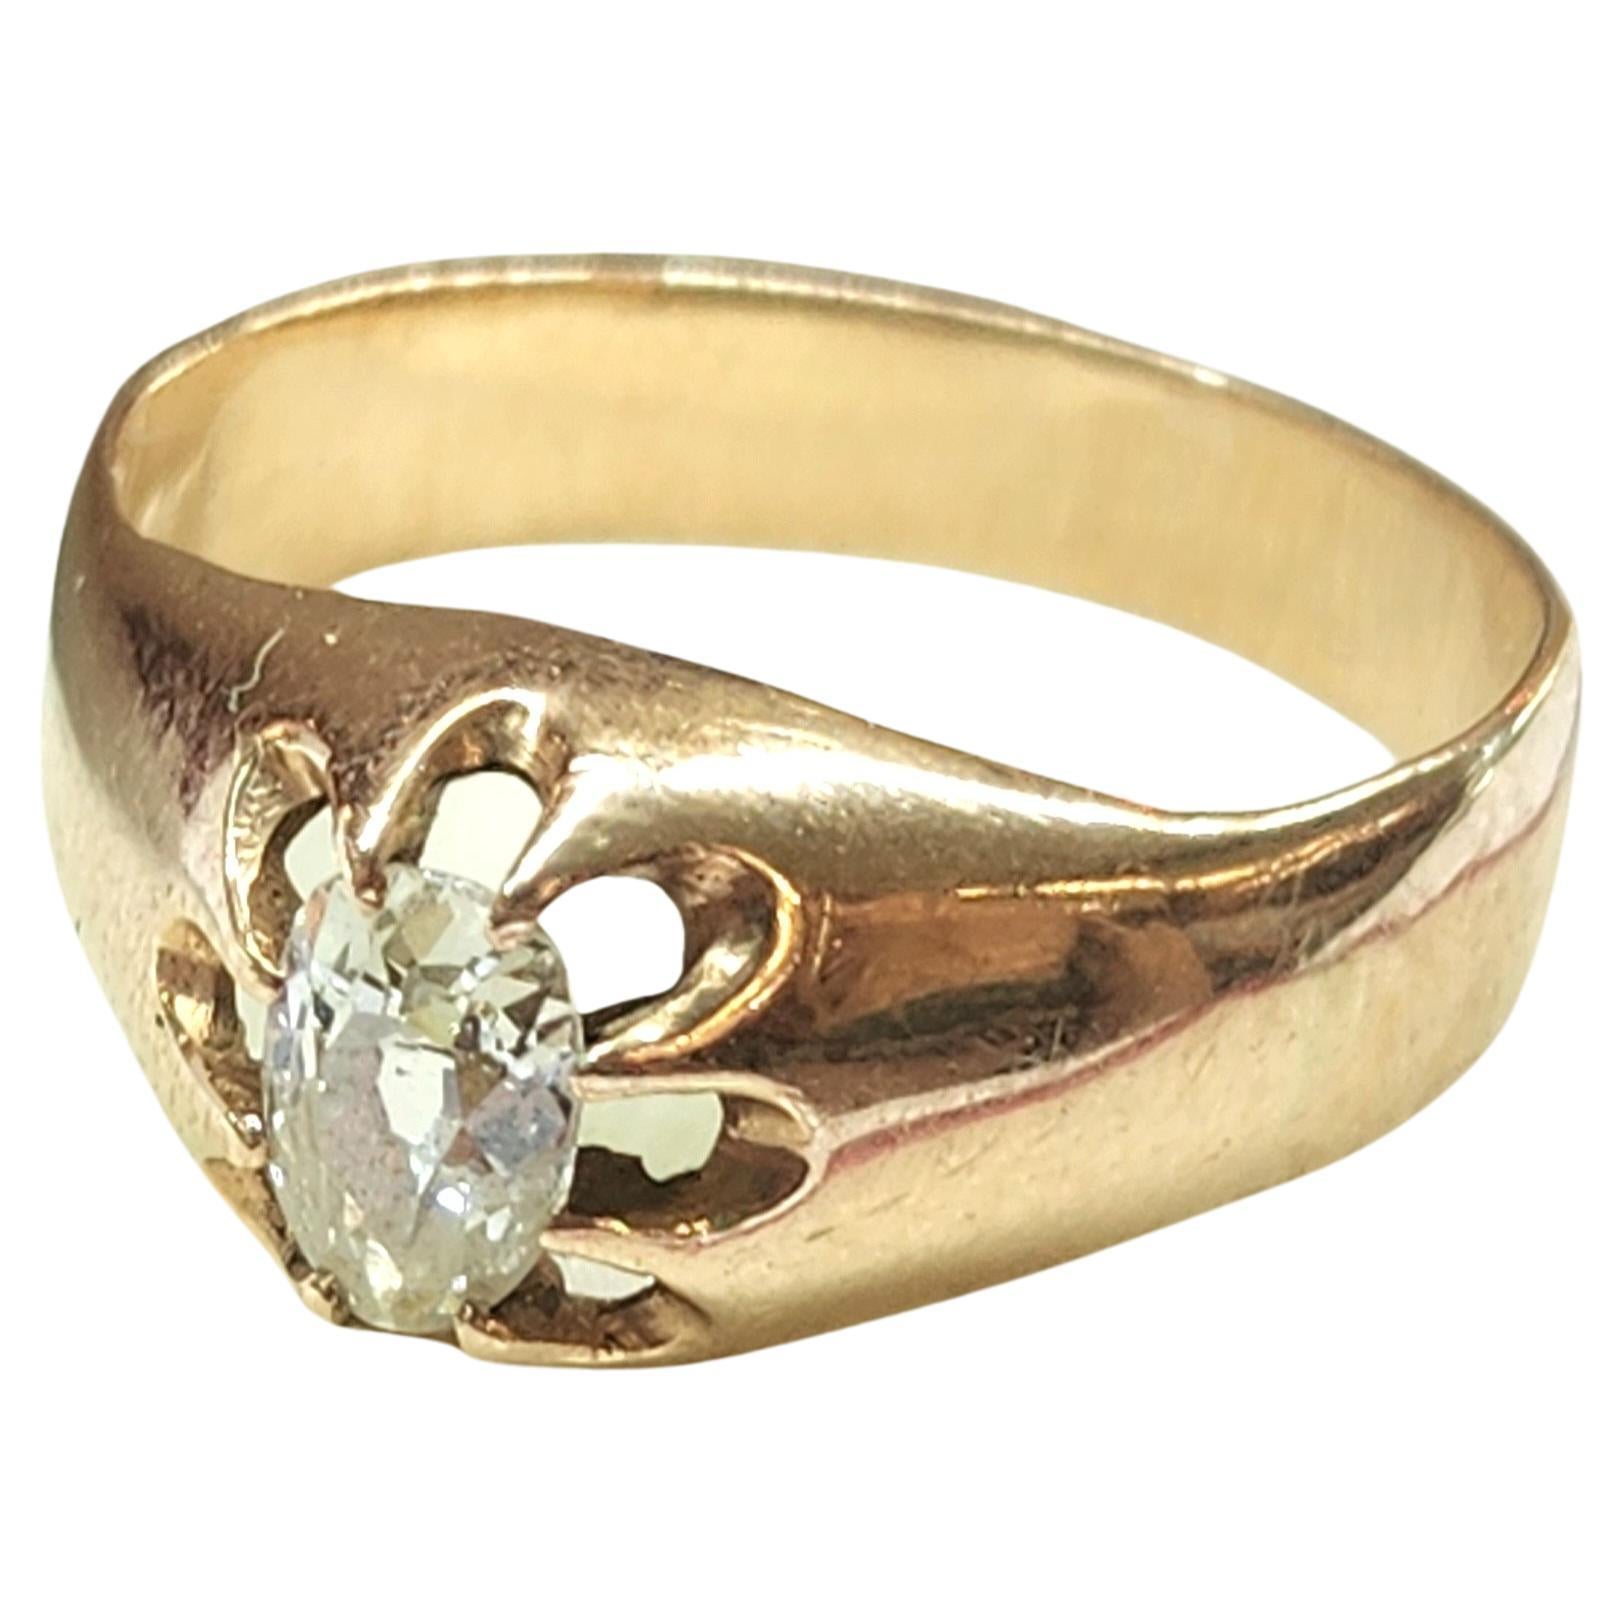 Antique 14k yellow gold solitaire ring unisex in style centered with pear shape old mine cut diamond white color vs clearity estimate weight 70 carats in open prongs ring dates back to 1900/1910.c